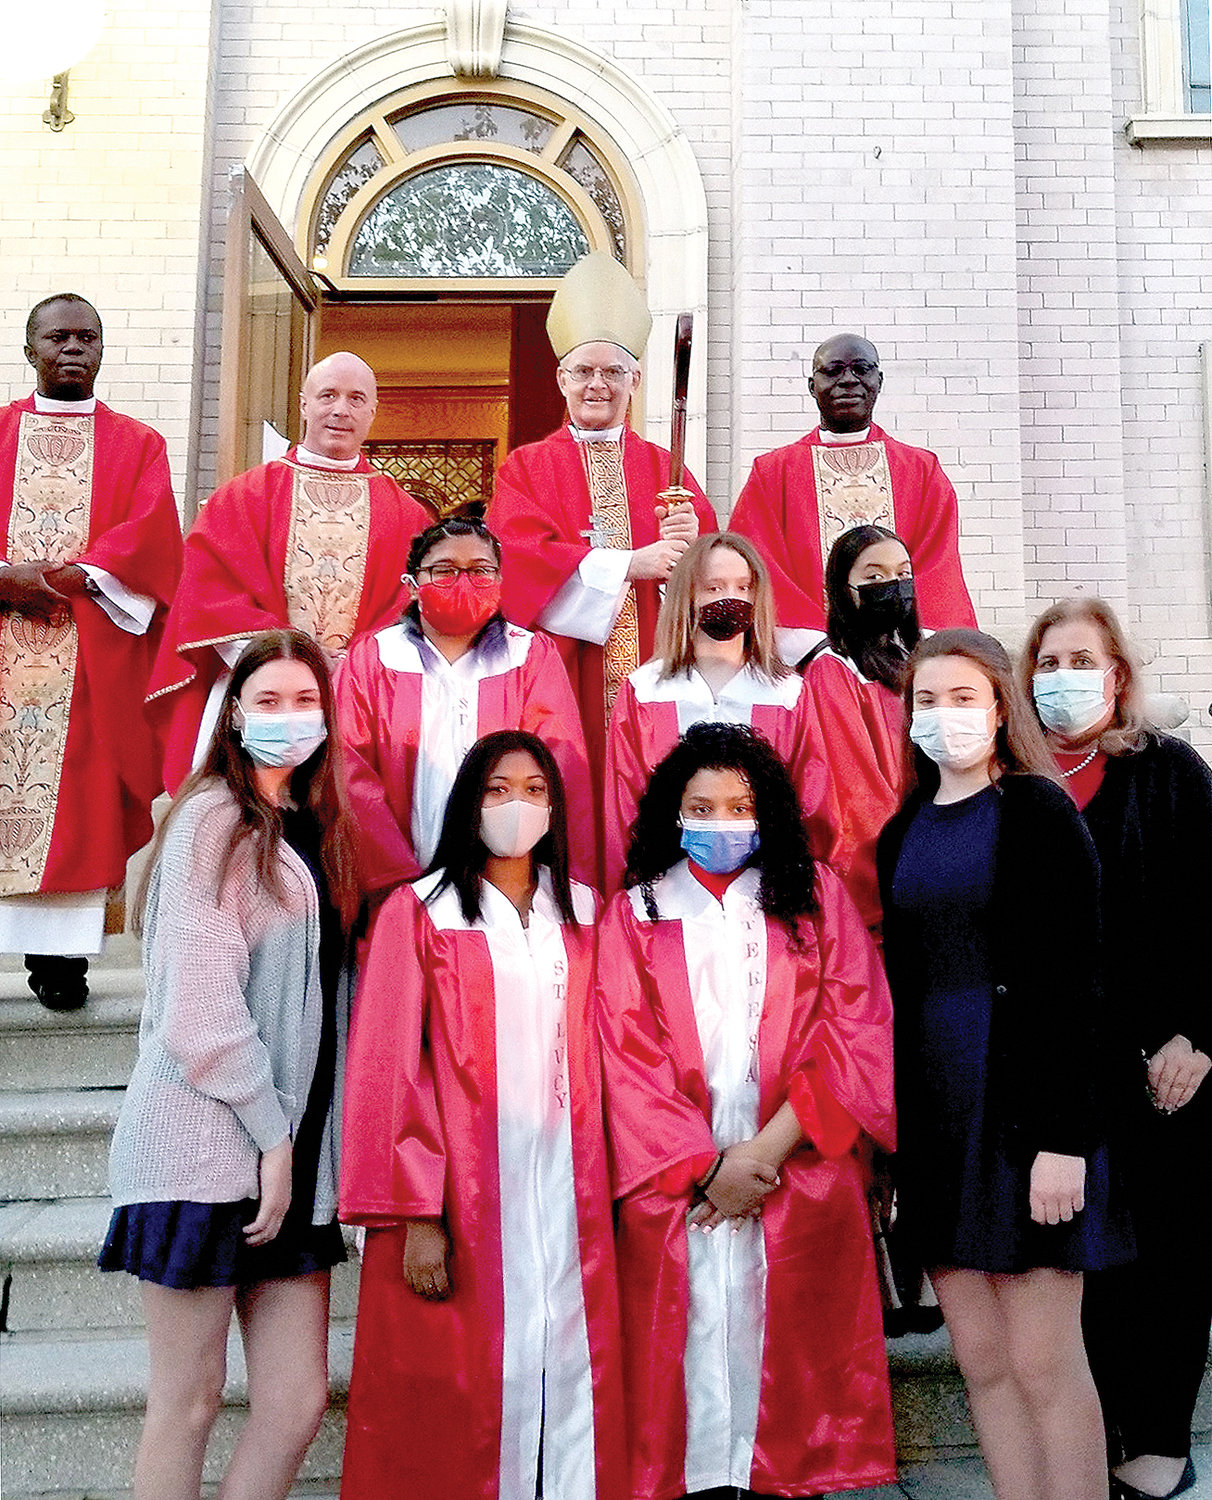 A group photo was taken after the May 10 confirmation ceremony at St. Barnabas Church in the Bronx. In the top row, from left, were Father Joseph Akunaeziri, parochial vicar; Father  Brendan Fitzgerald, pastor; Auxiliary Bishop Peter Byrne; and Father John Smart, who is in residence at St. Barnabas. In the second row, from left, are Michelle Torres, Ceili Chapter and Ciara Leo. In the bottom row, from left, are Emma Brannigan, Arriana Rijfkogel, Shania Cueto, Sarah Brannigan and Sharon Traditi, campus ministry moderator at Saint Barnabas High School.